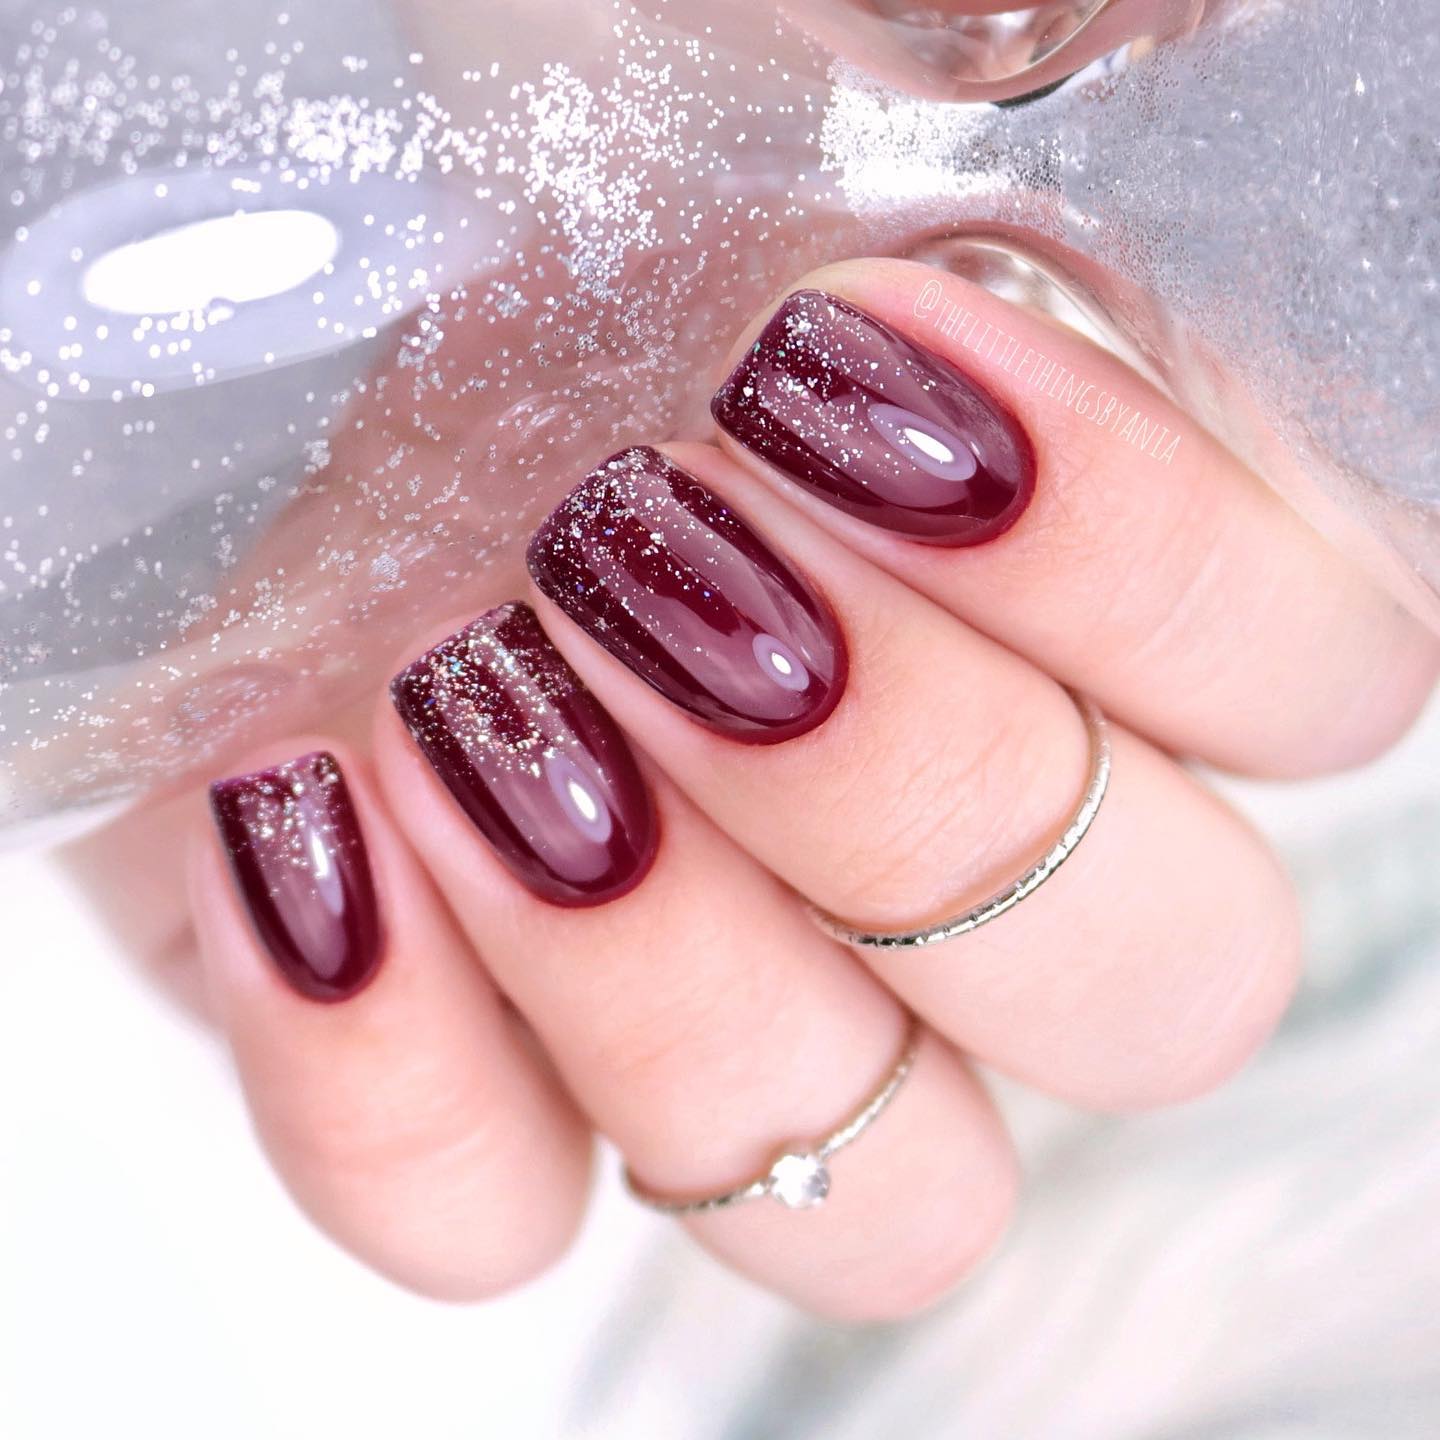 Short Square Burgundy Nails with Silver Glitter on Tips